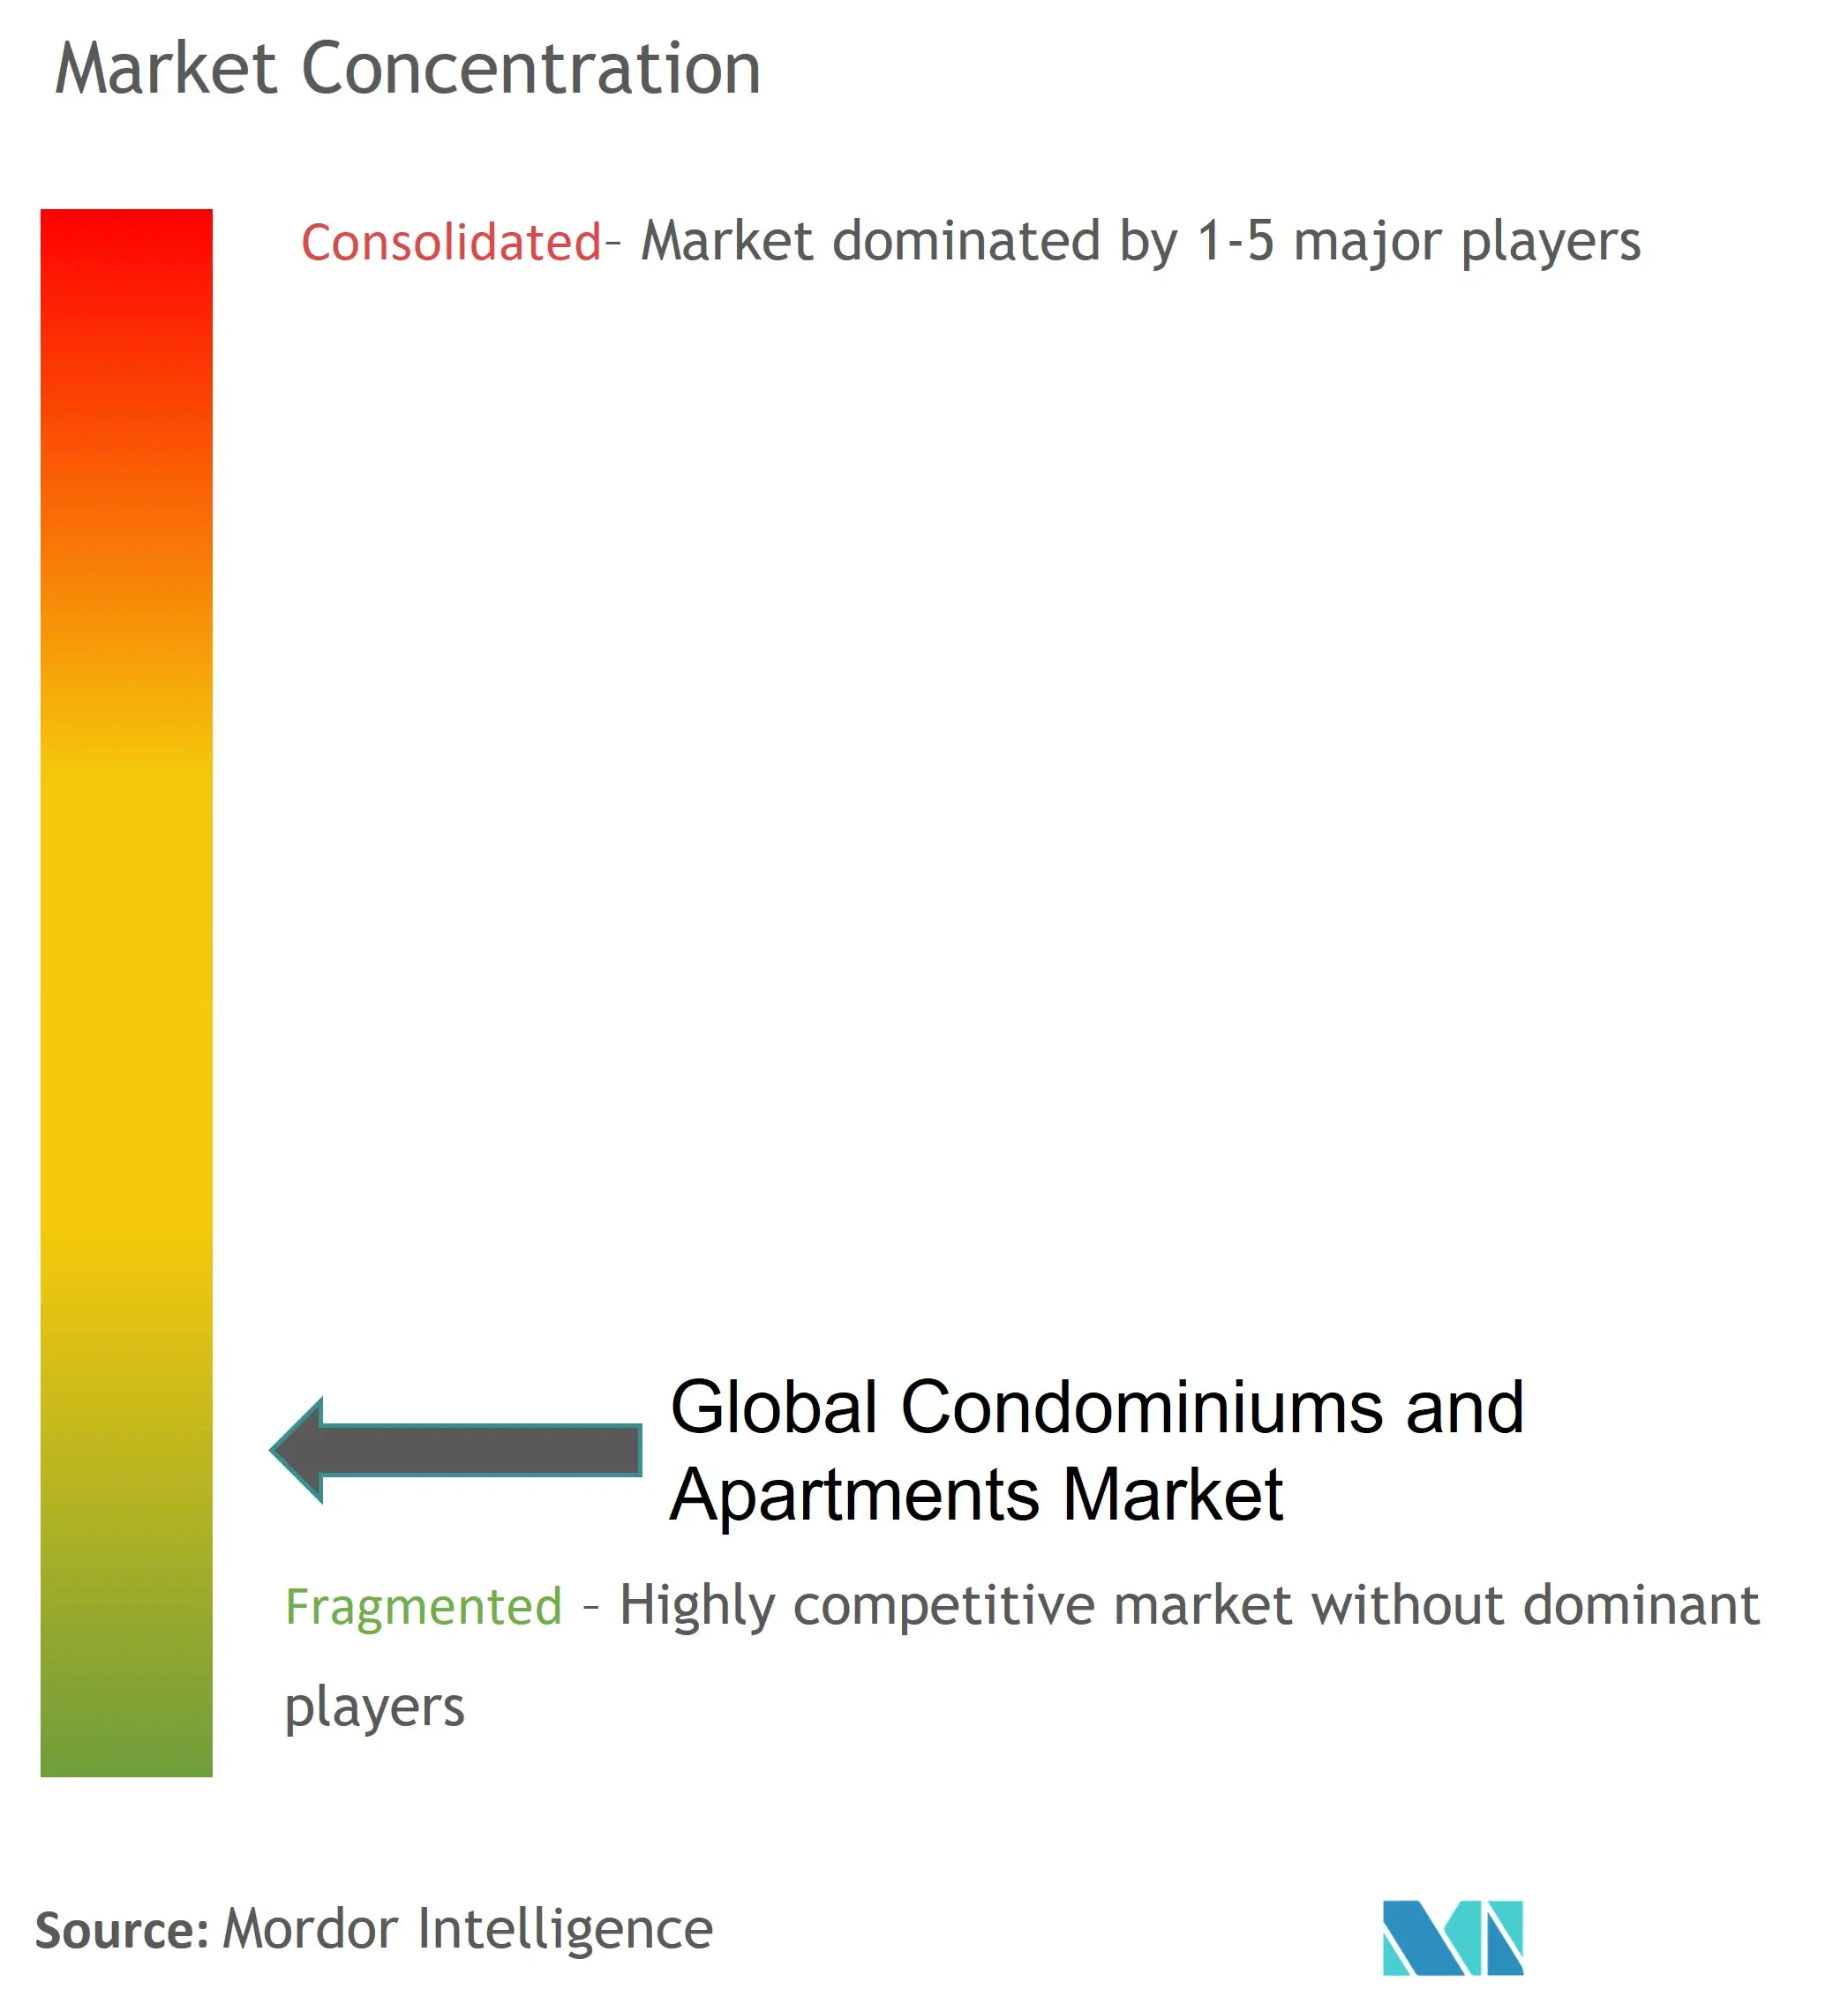 Global Condominiums and Apartments Market Concentration